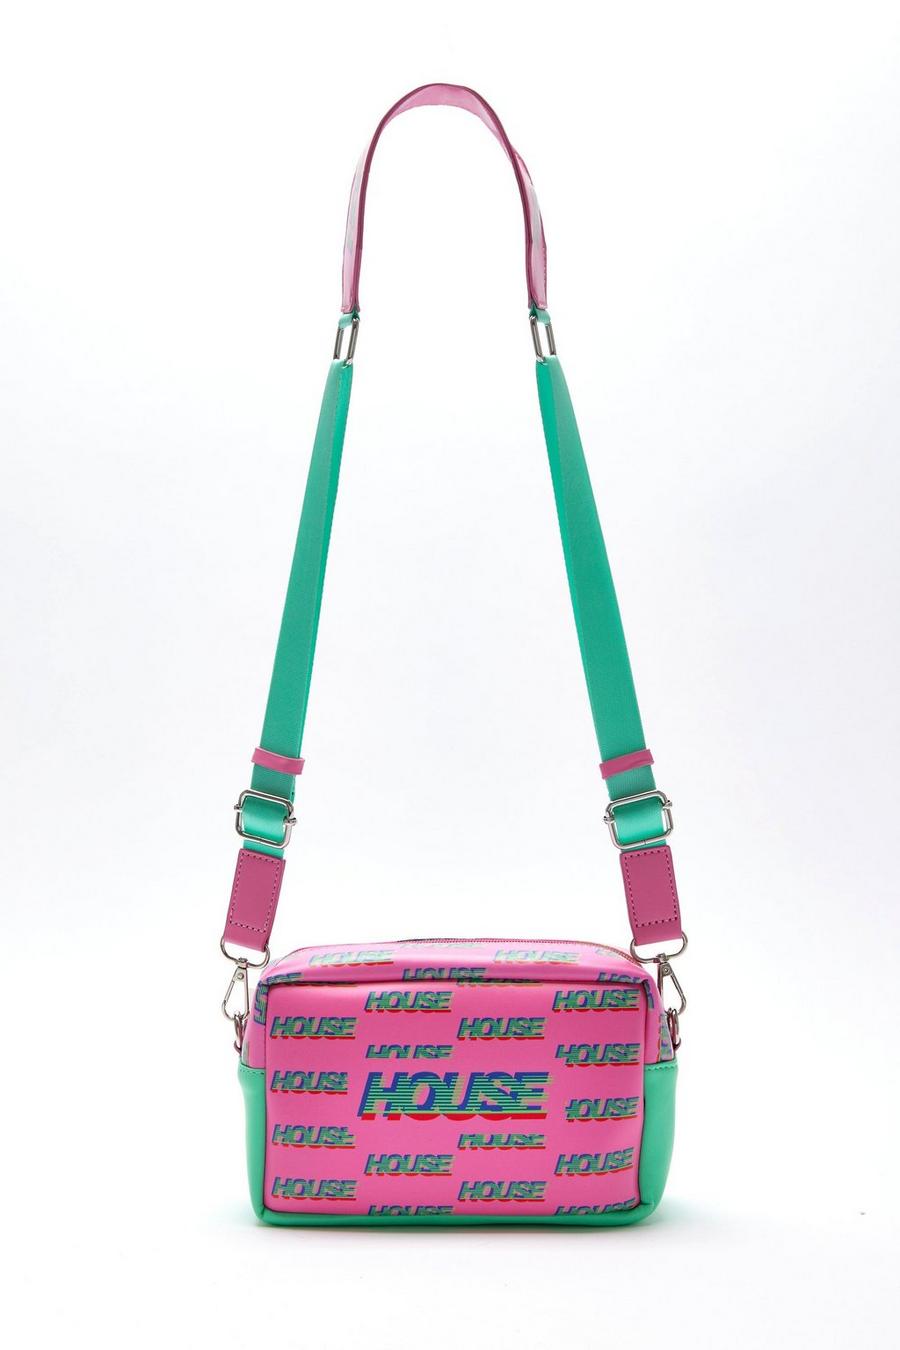 Cross Body Bag In Pink And Mint With ‘House’ Print